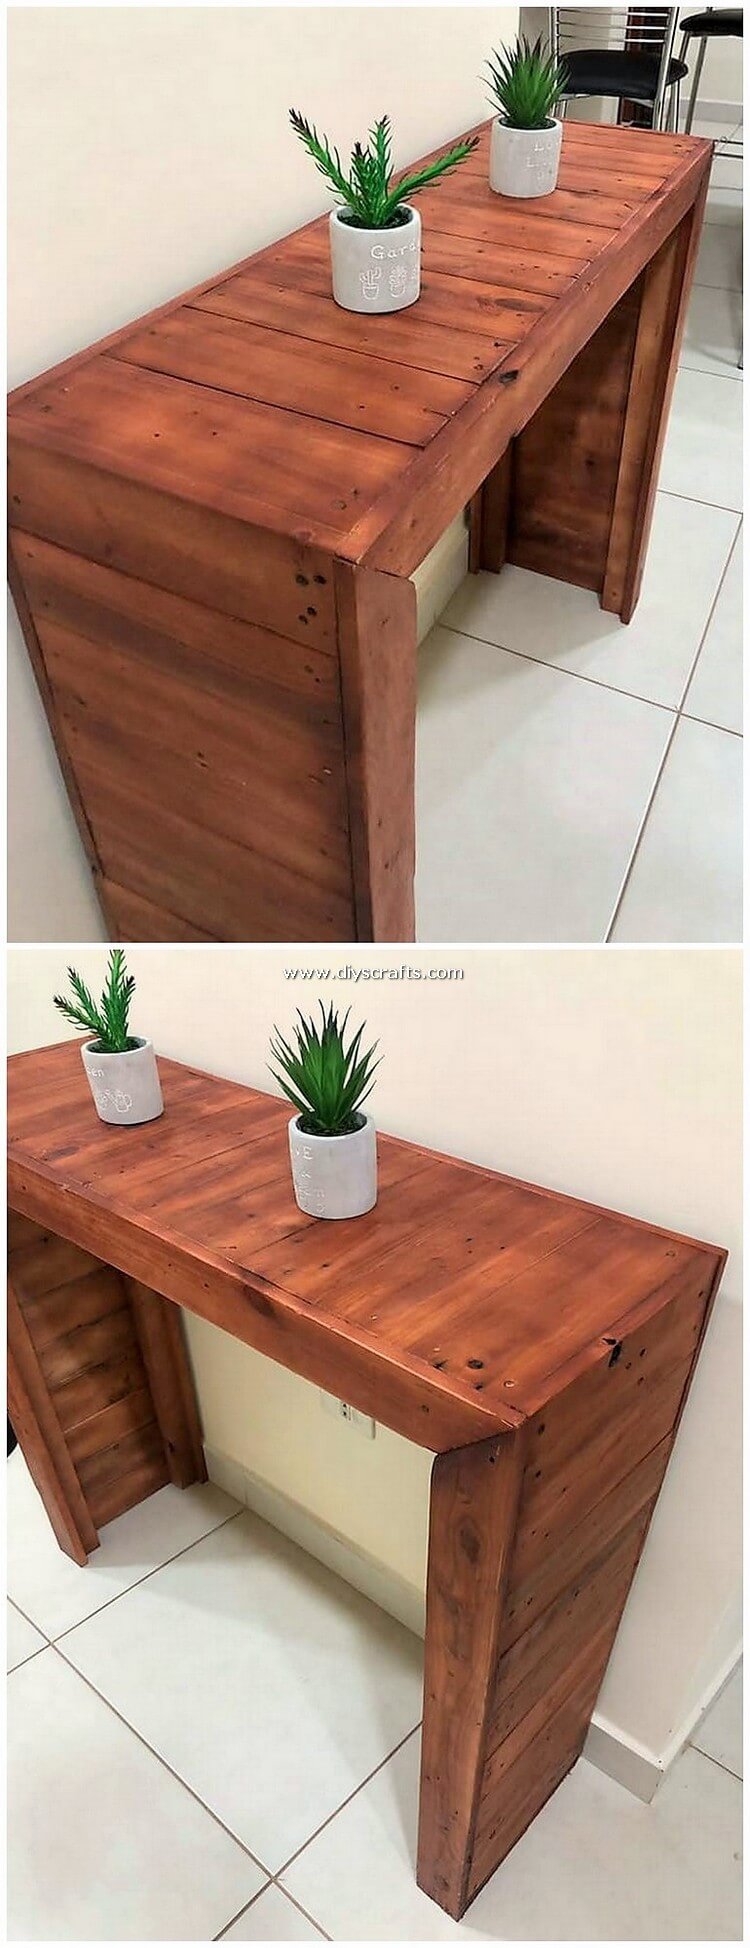 Wood-Pallet-Table-1